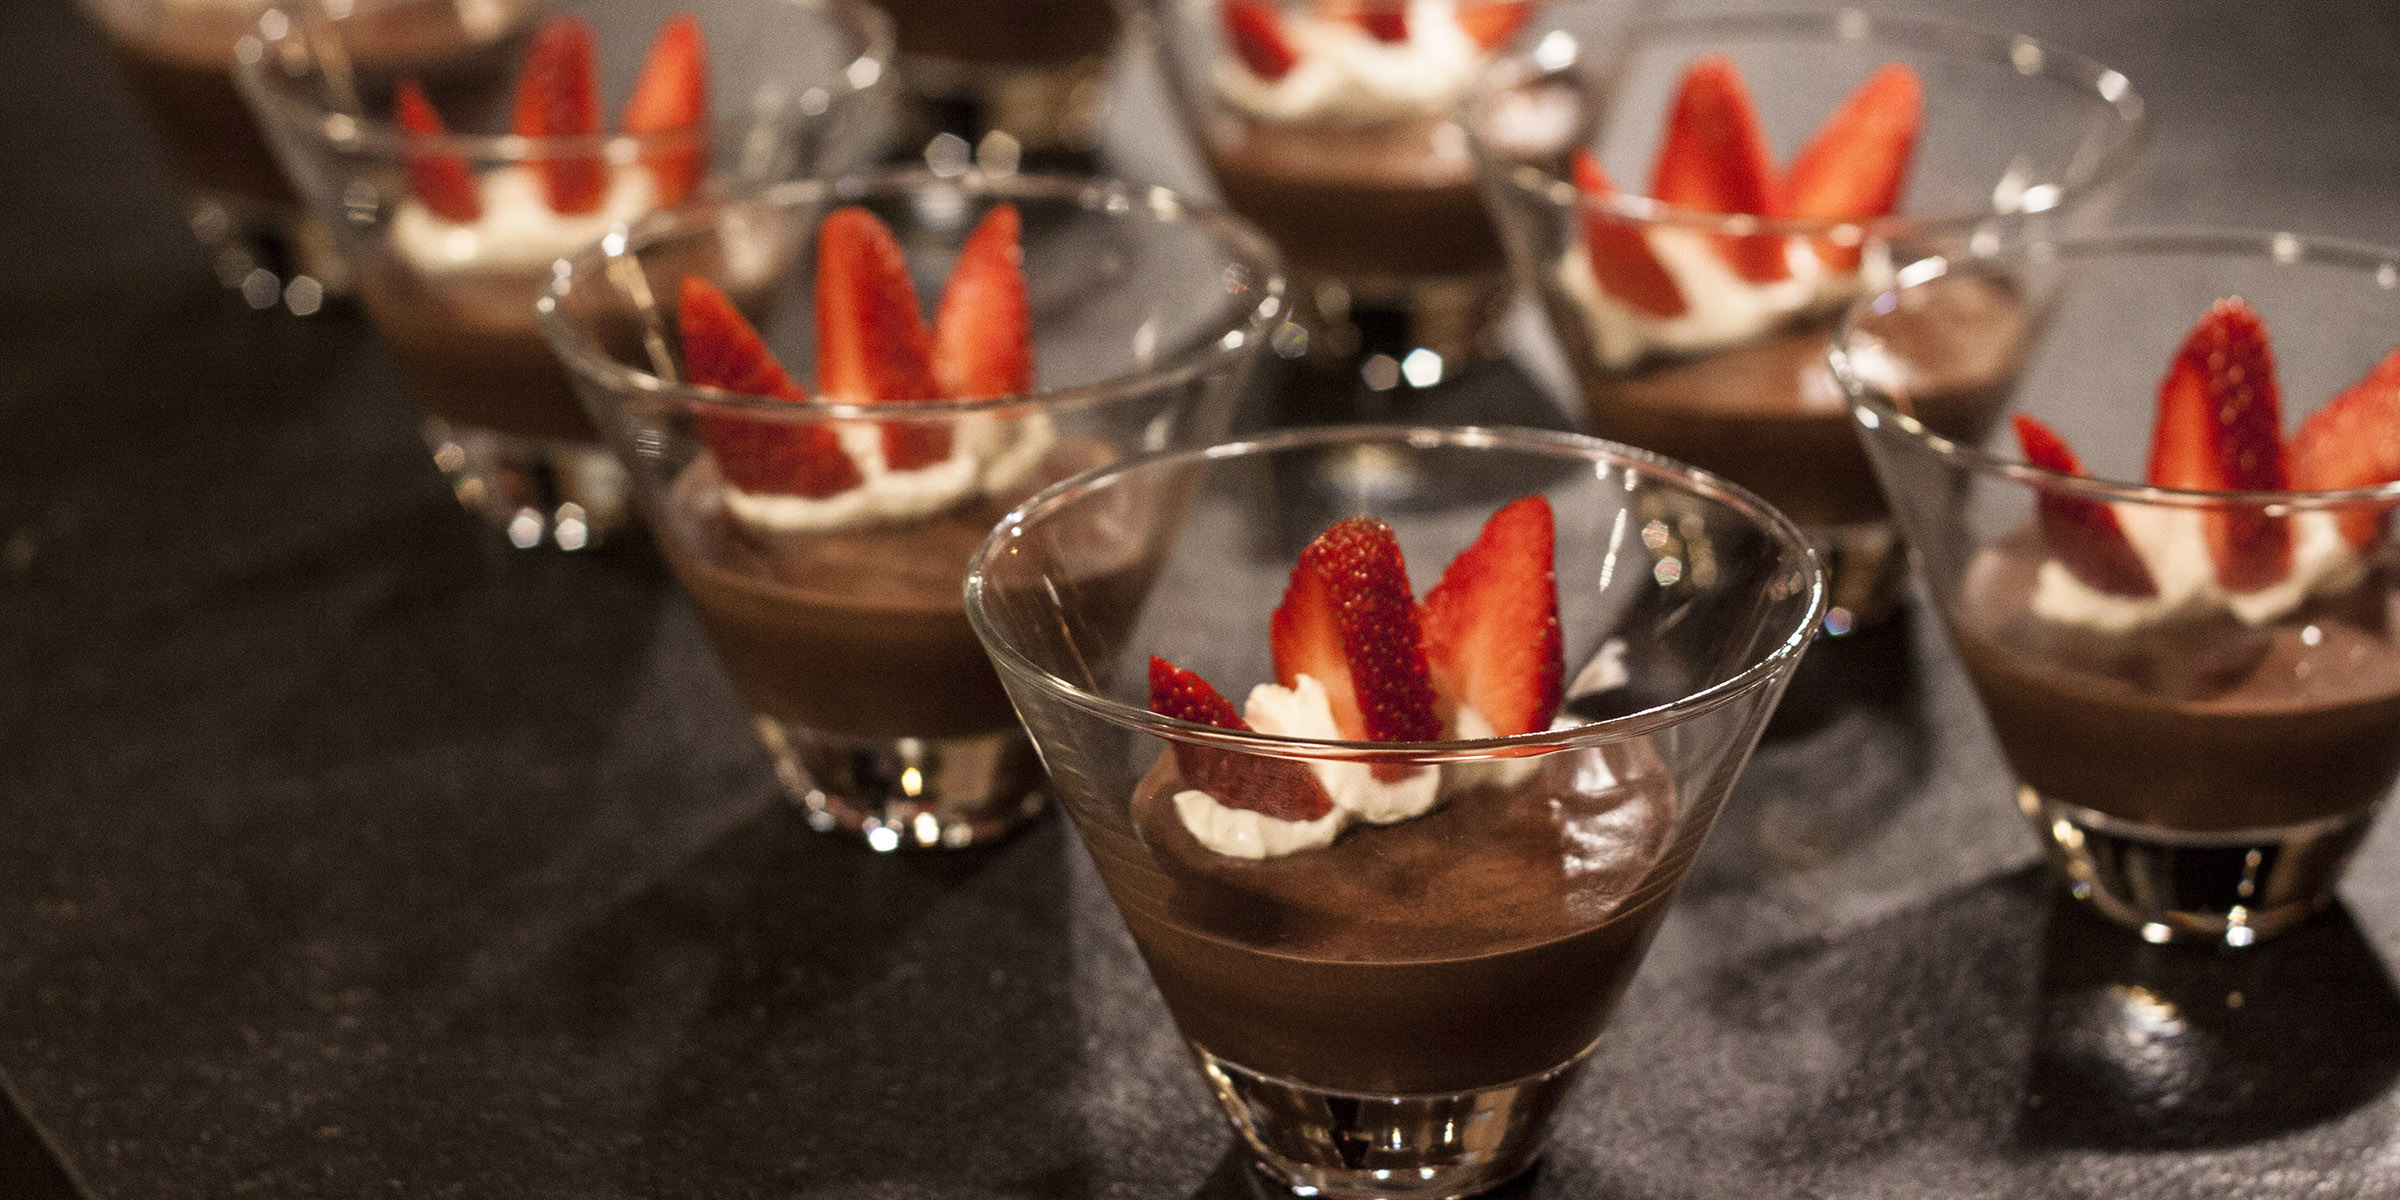 Homemade chocolate mousse with strawberrys